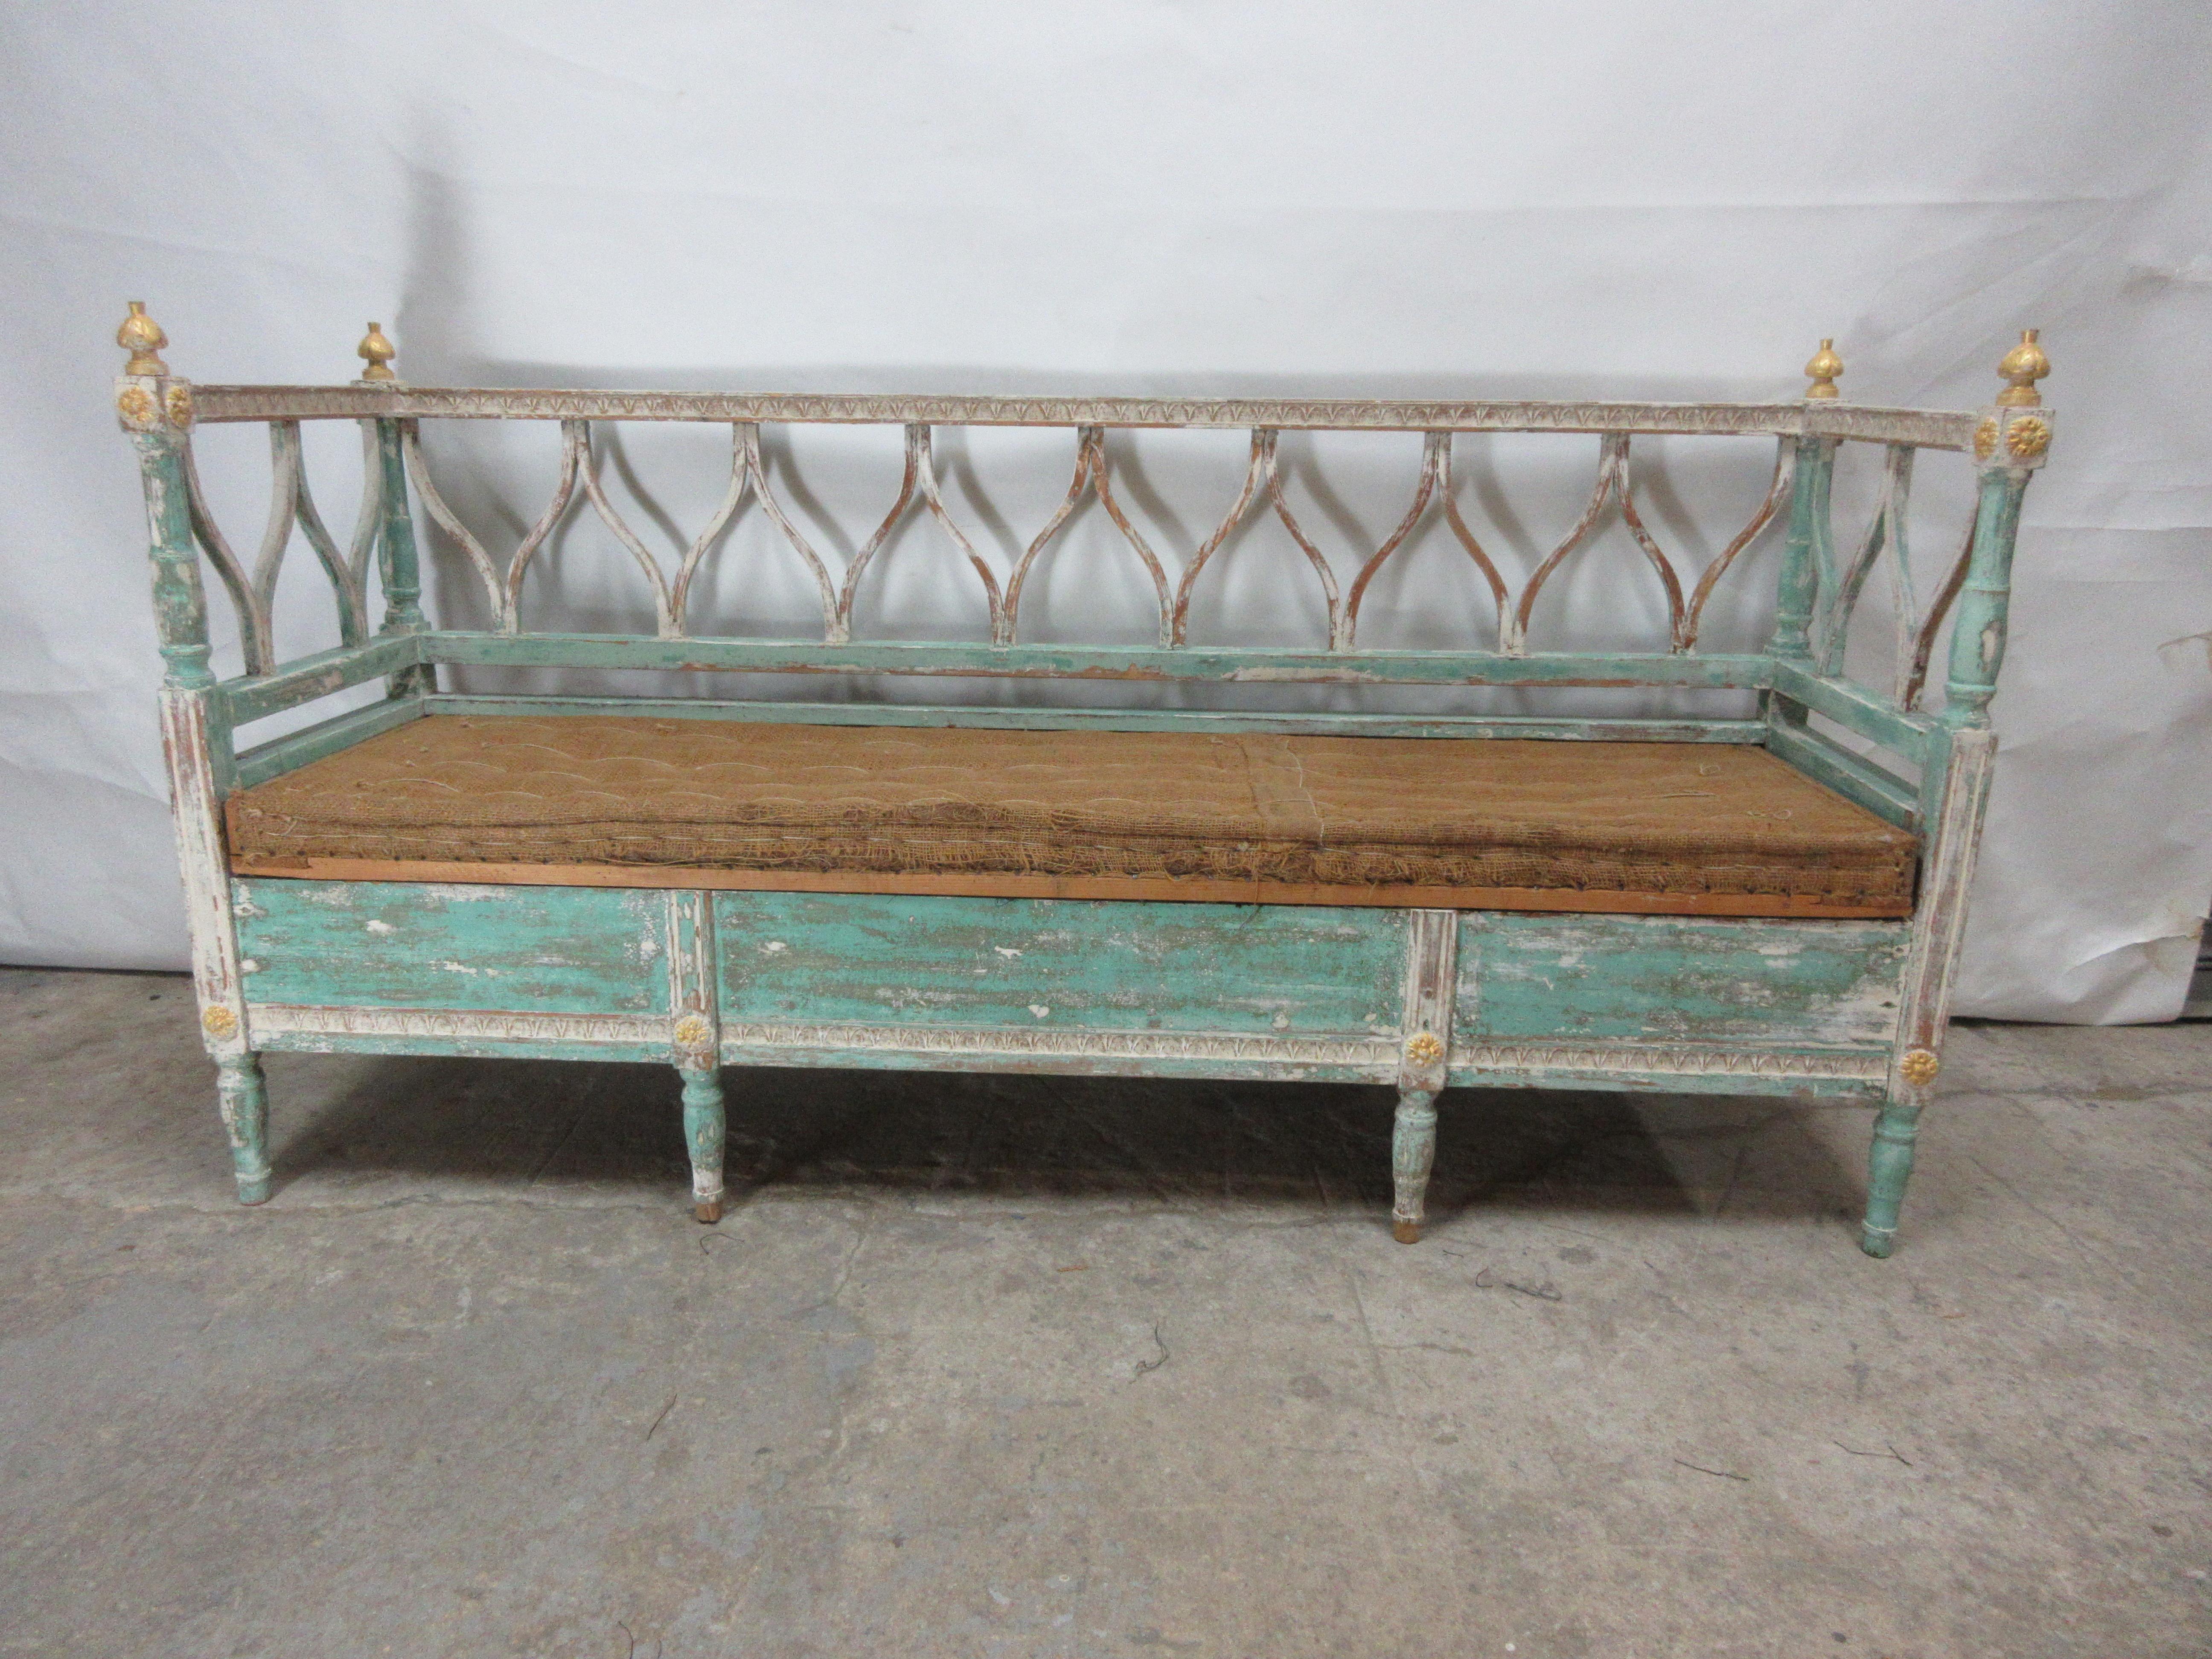 This is a 100% original painted Swedish Gustavian sofa with its original burlap seat cushion. This sofa was found at an estate auction just north of Stockholm, Sweden.